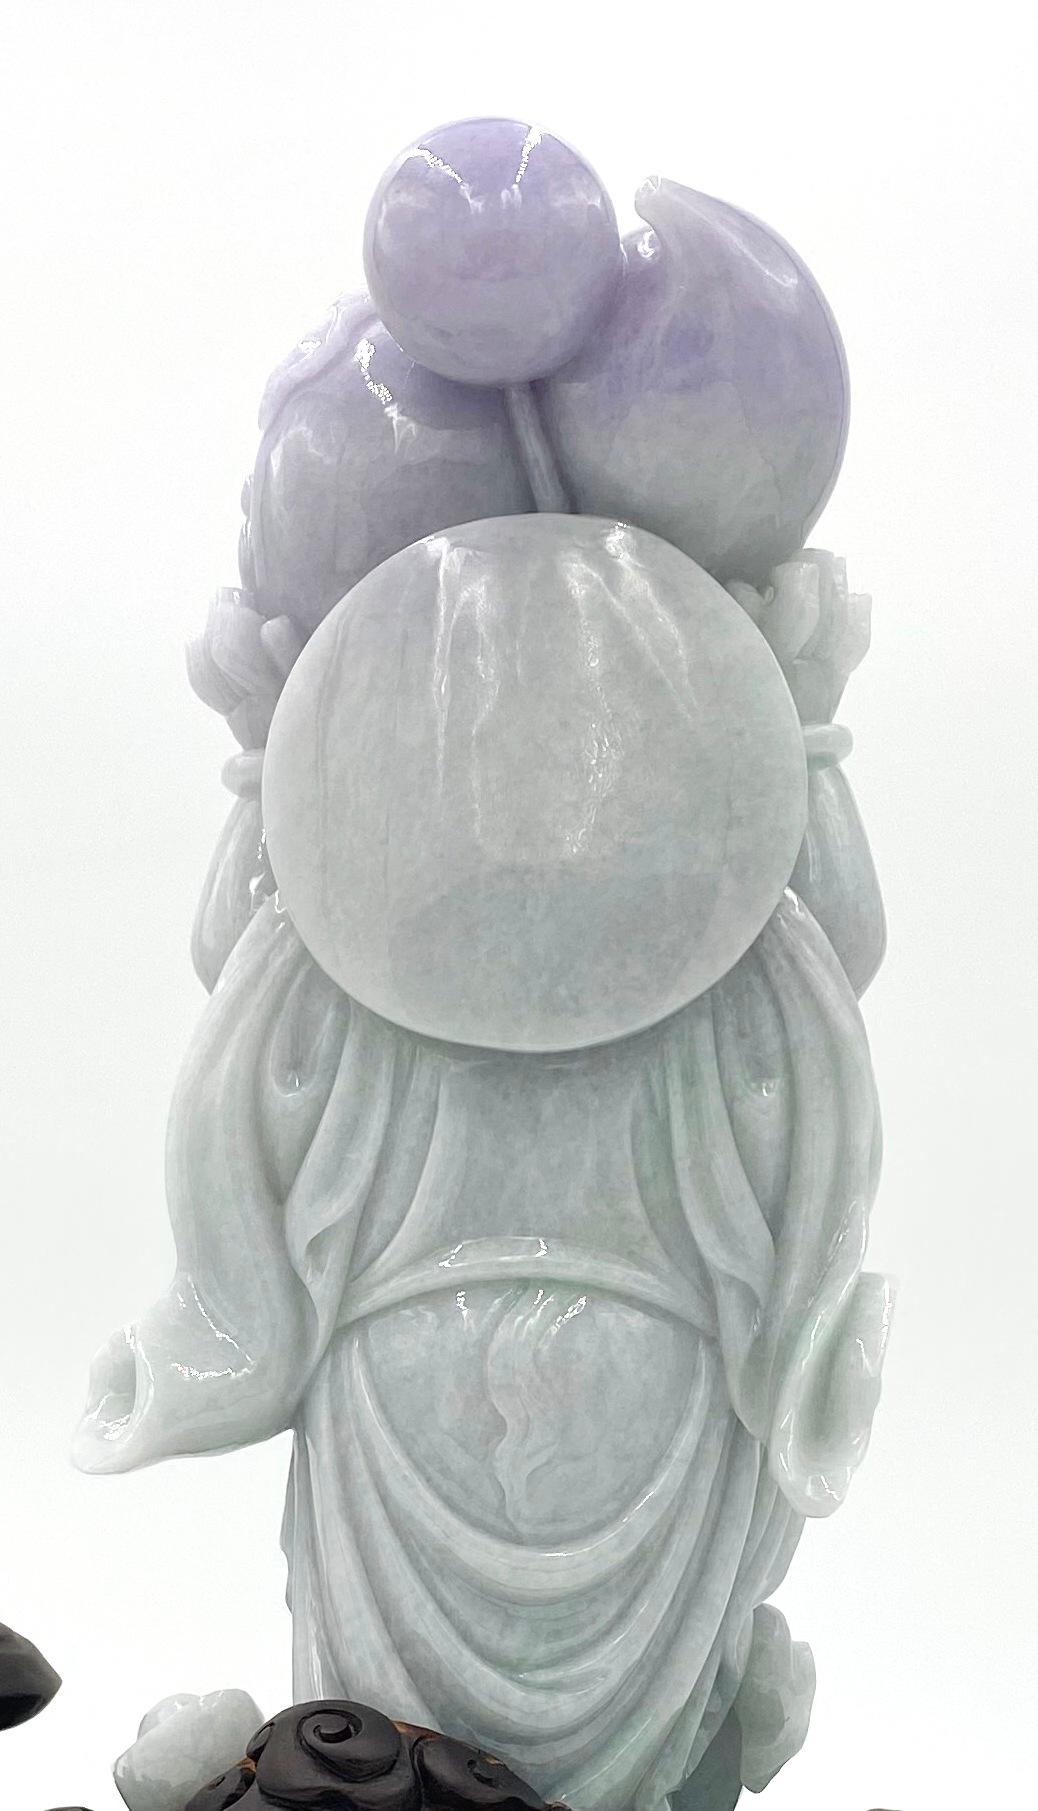 Jadeite Jade Buddha Carving - Other Art Style Sculpture by Unknown